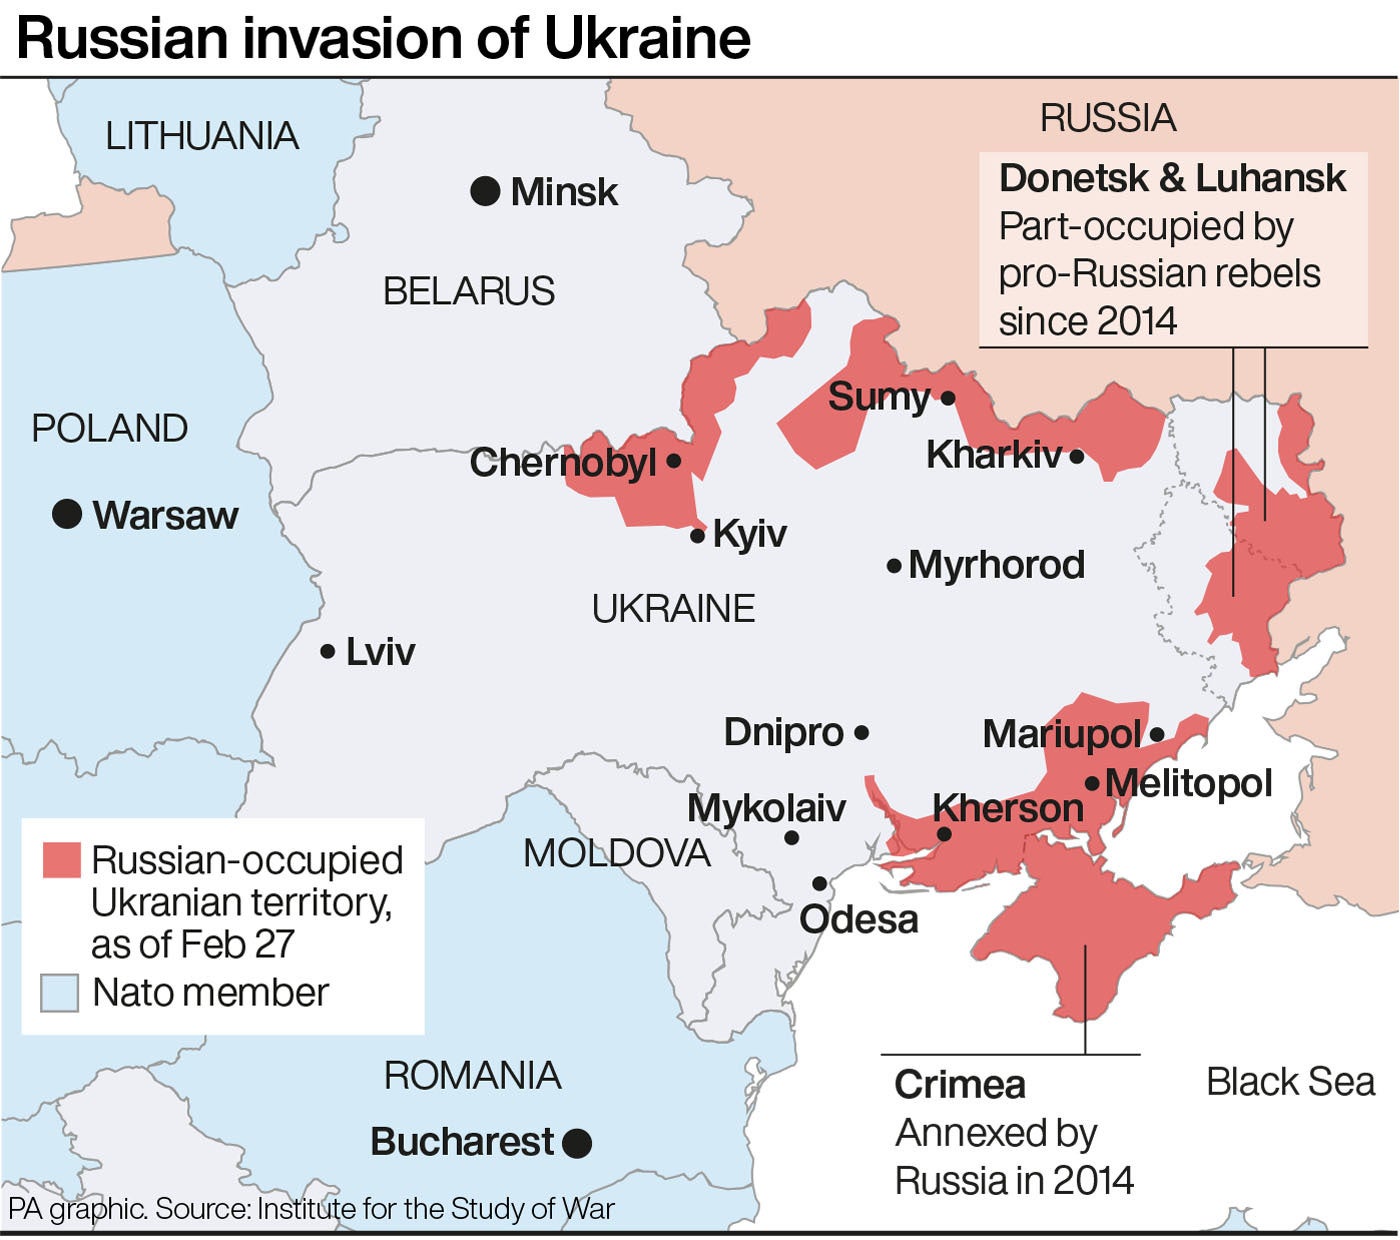 This map shows the areas Russia has taken as part of its invasion of Ukraine